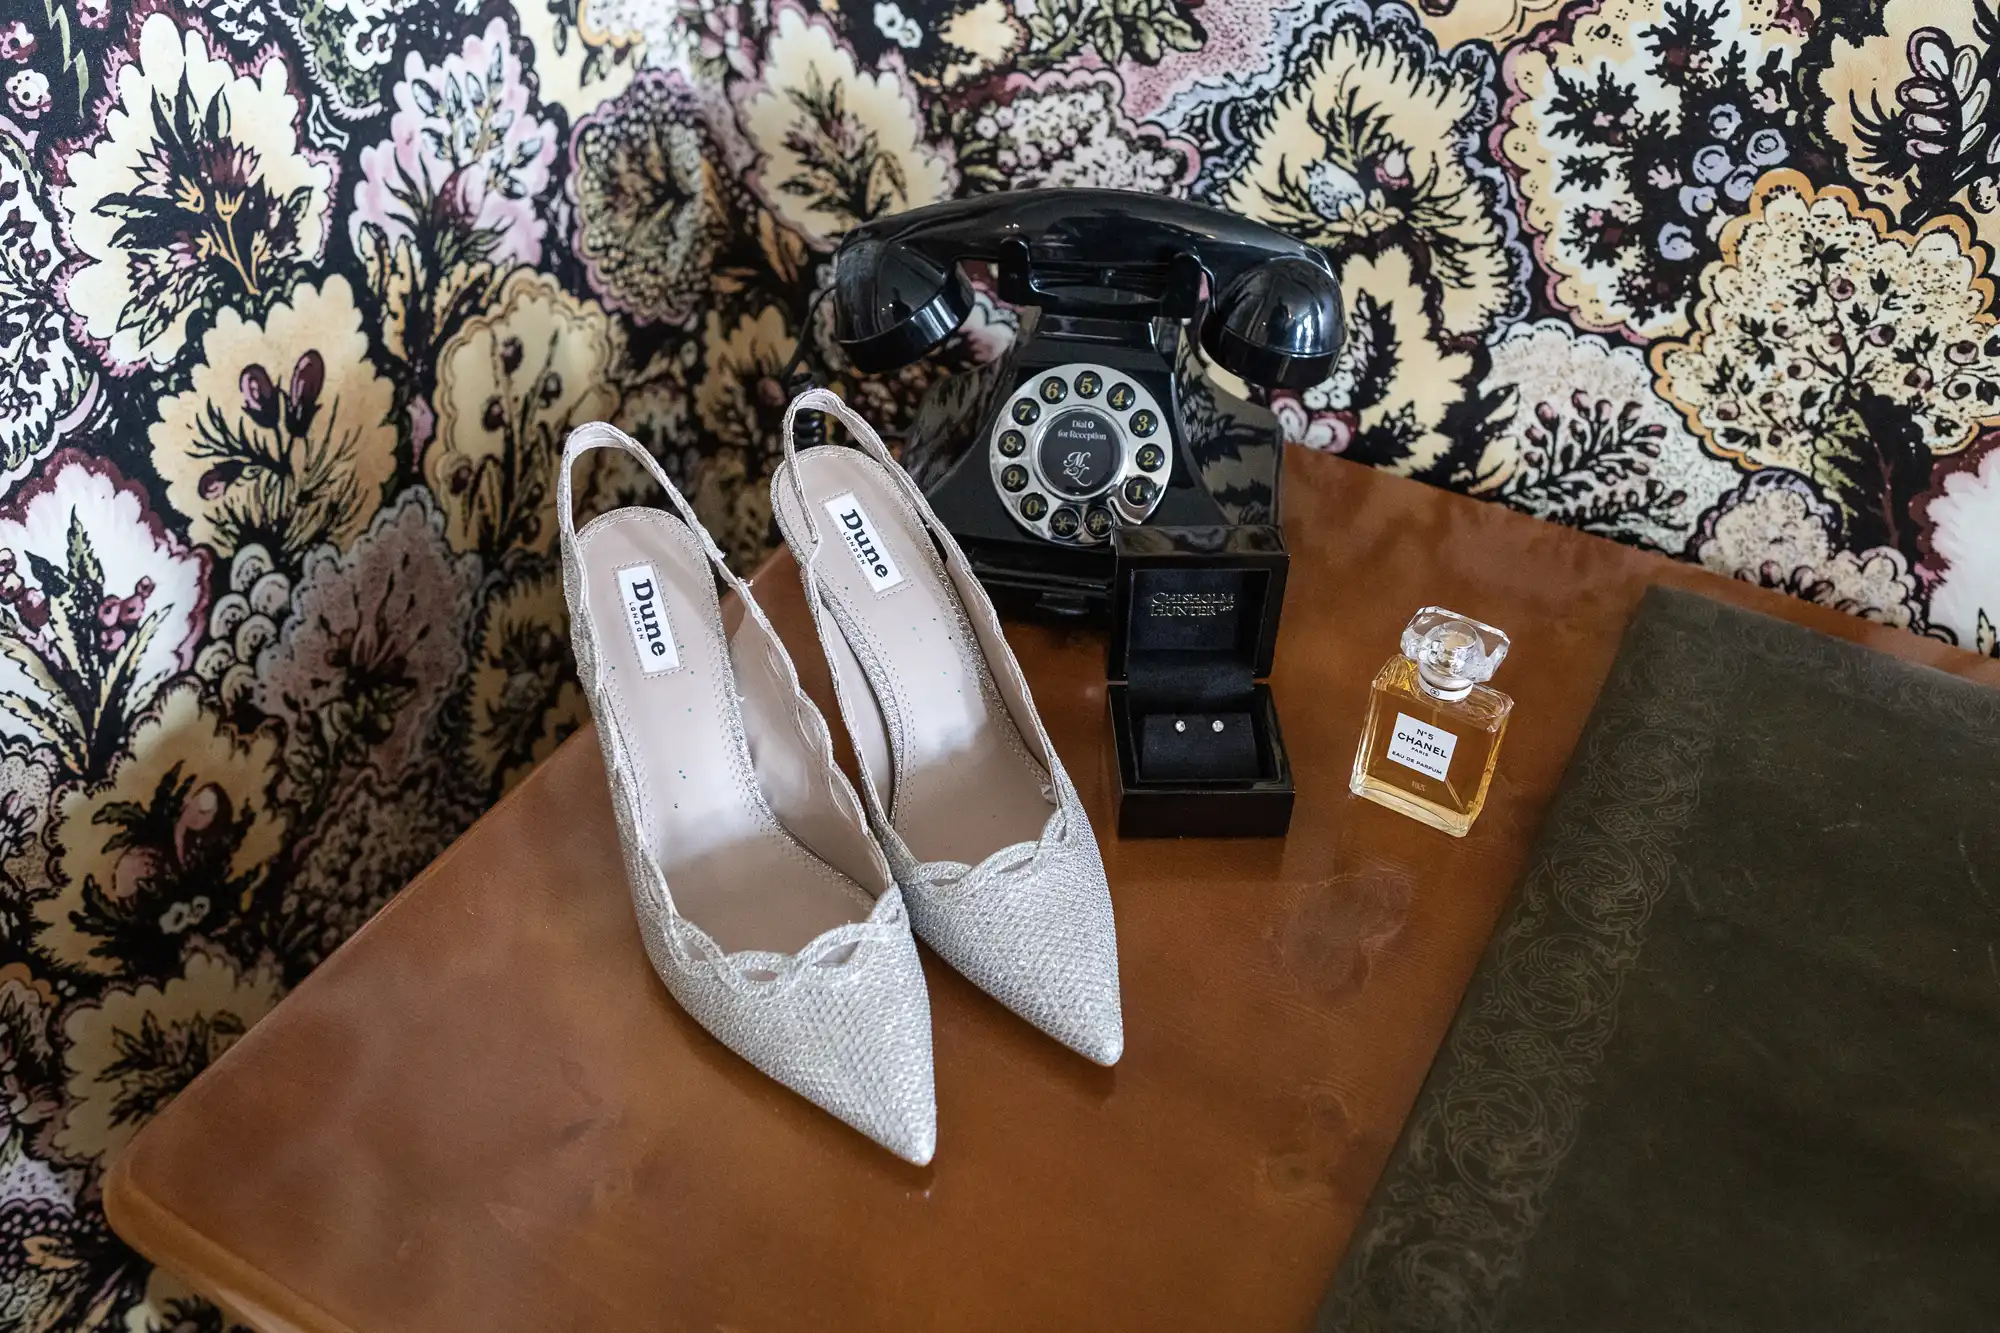 A pair of white bridal shoes, a vintage black telephone, a watch, and a perfume bottle on a brown leather surface against a floral backdrop.